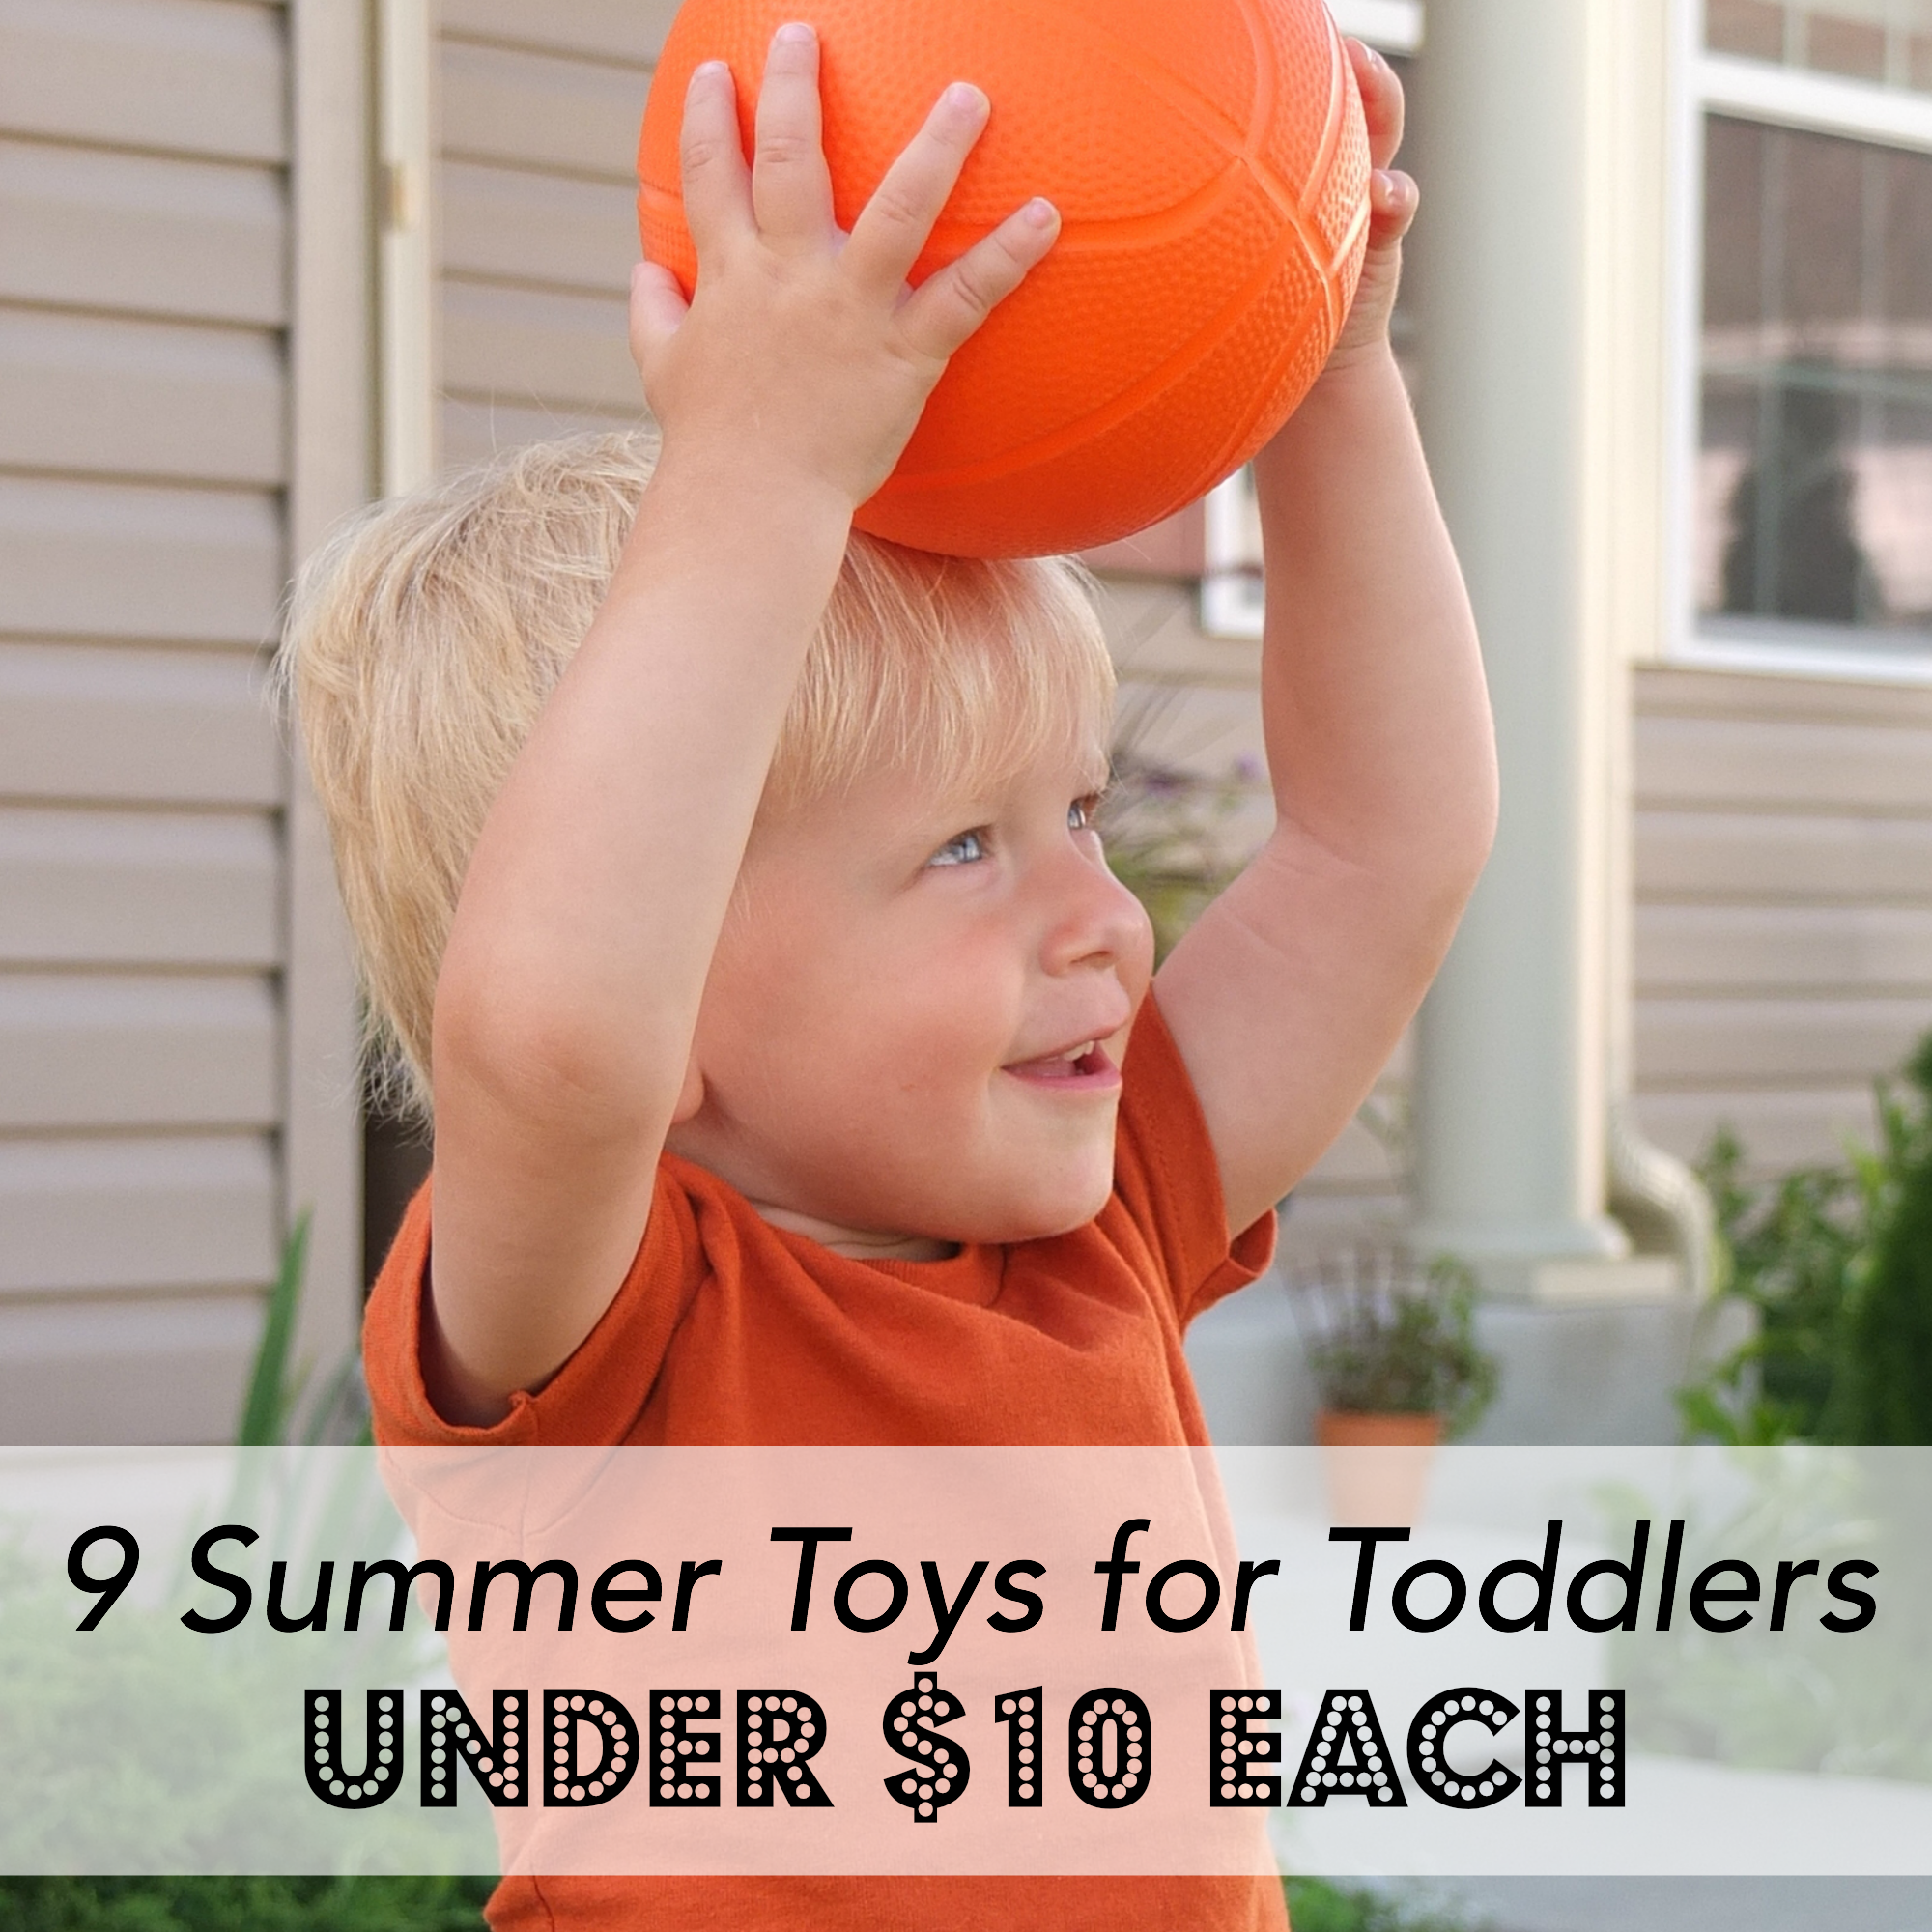 https://www.pickanytwo.net/wp-content/uploads/2014/07/Summer-Toys-for-Toddlers.png